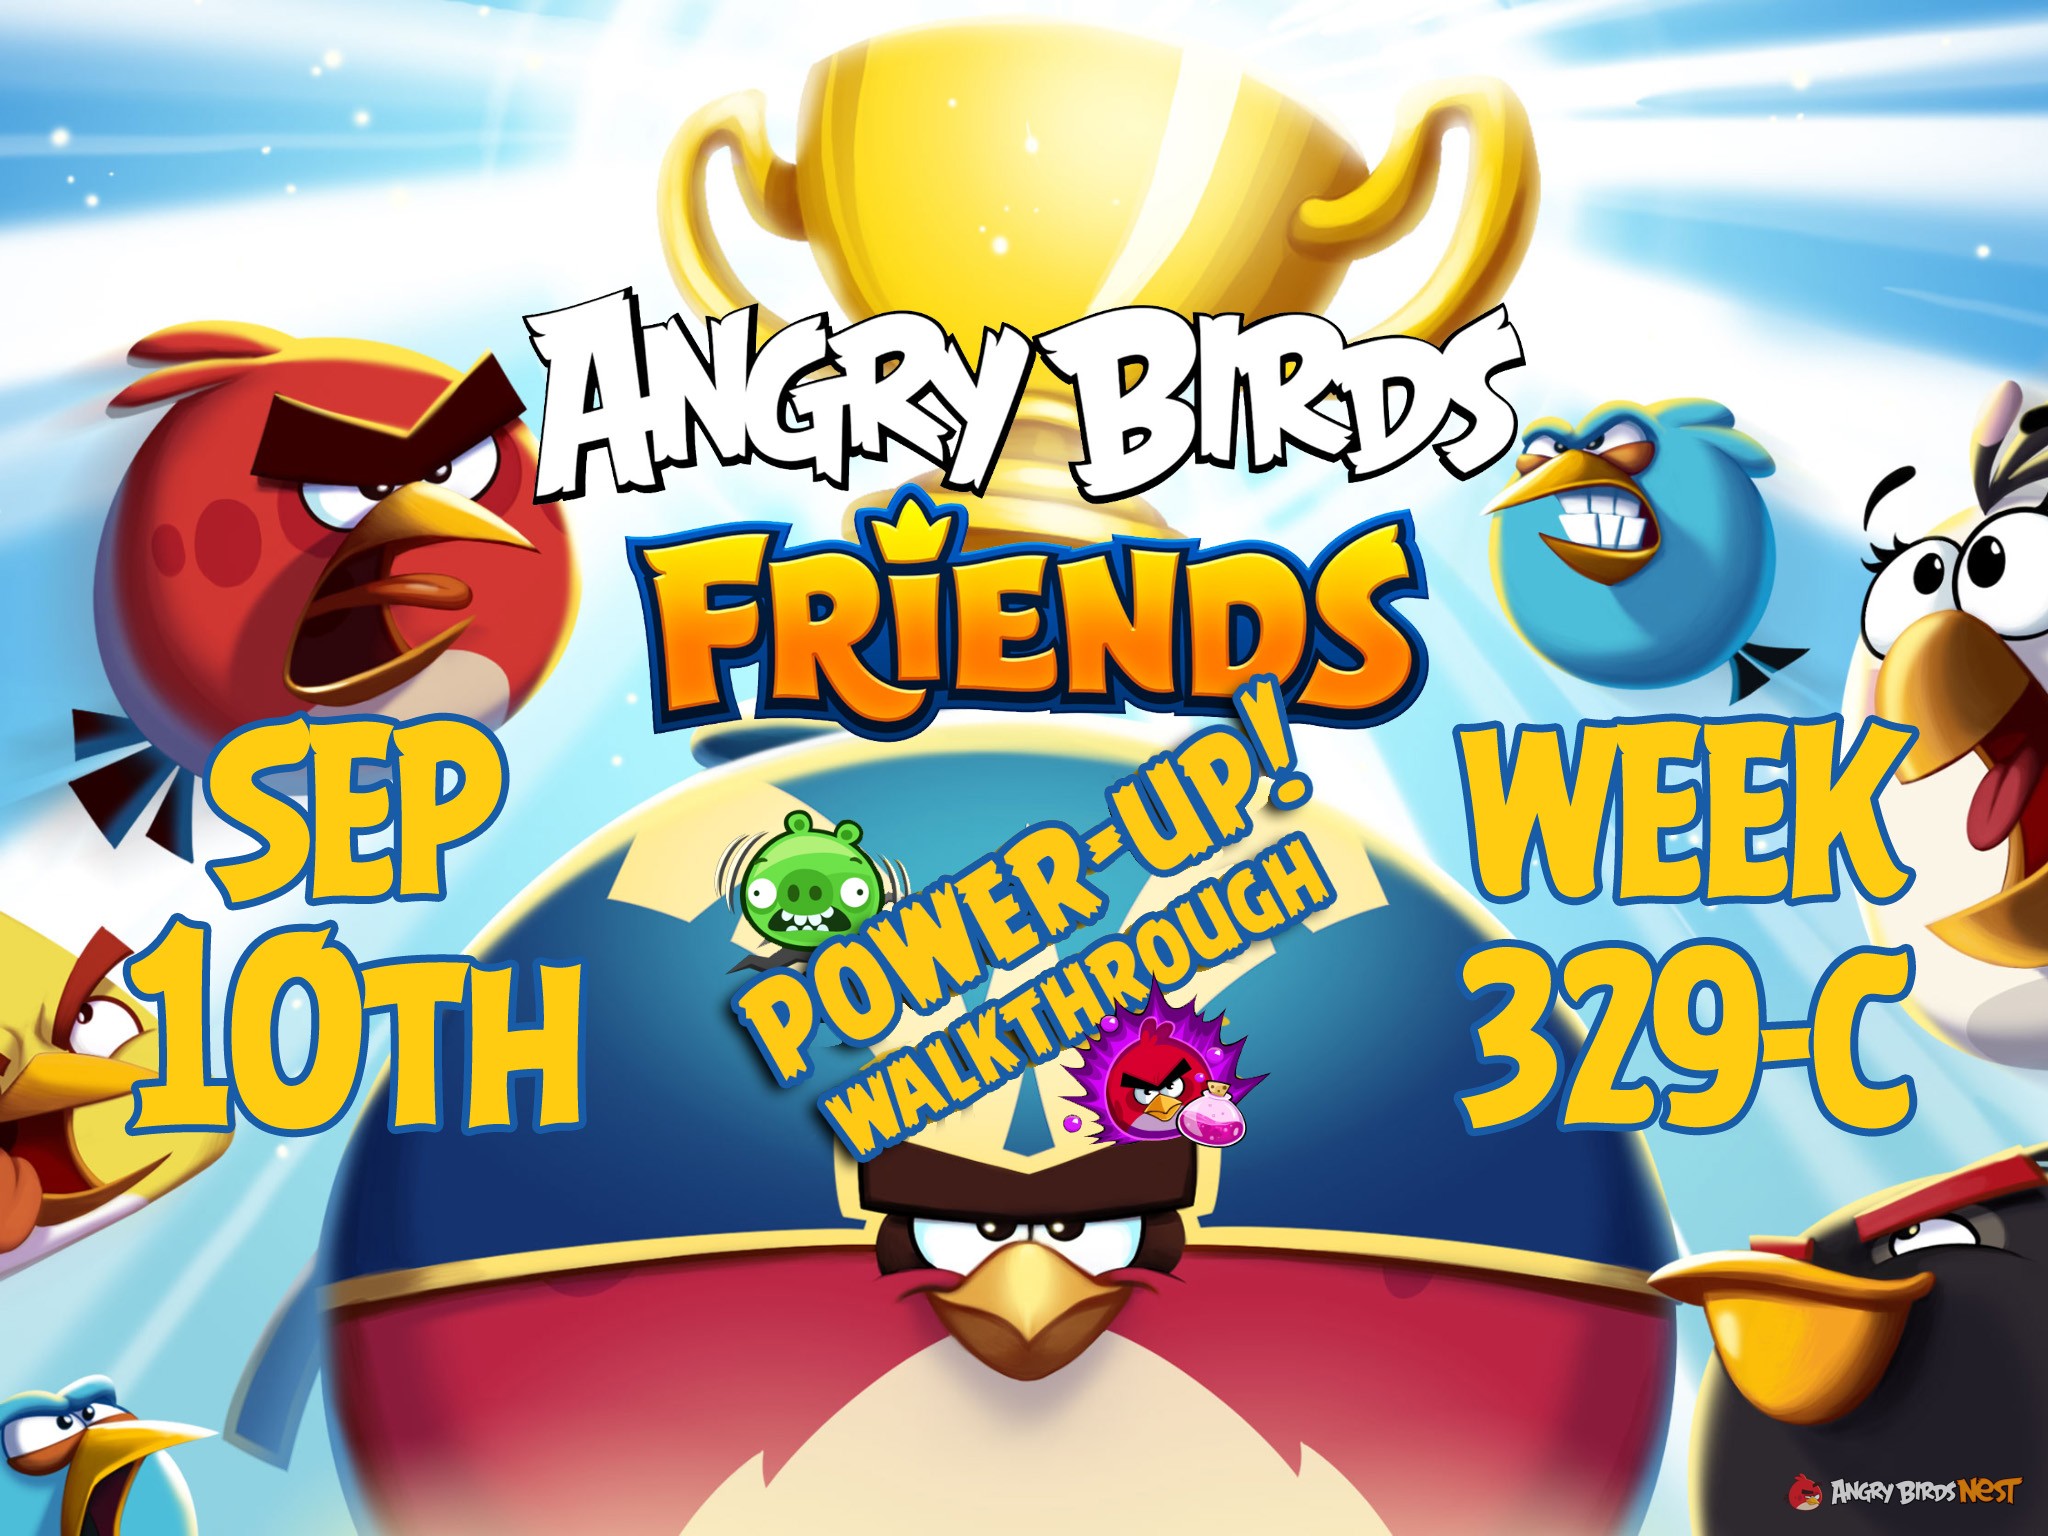 Angry-Birds-Friends-Tournament-Week-329-C-Feature-Image-PU